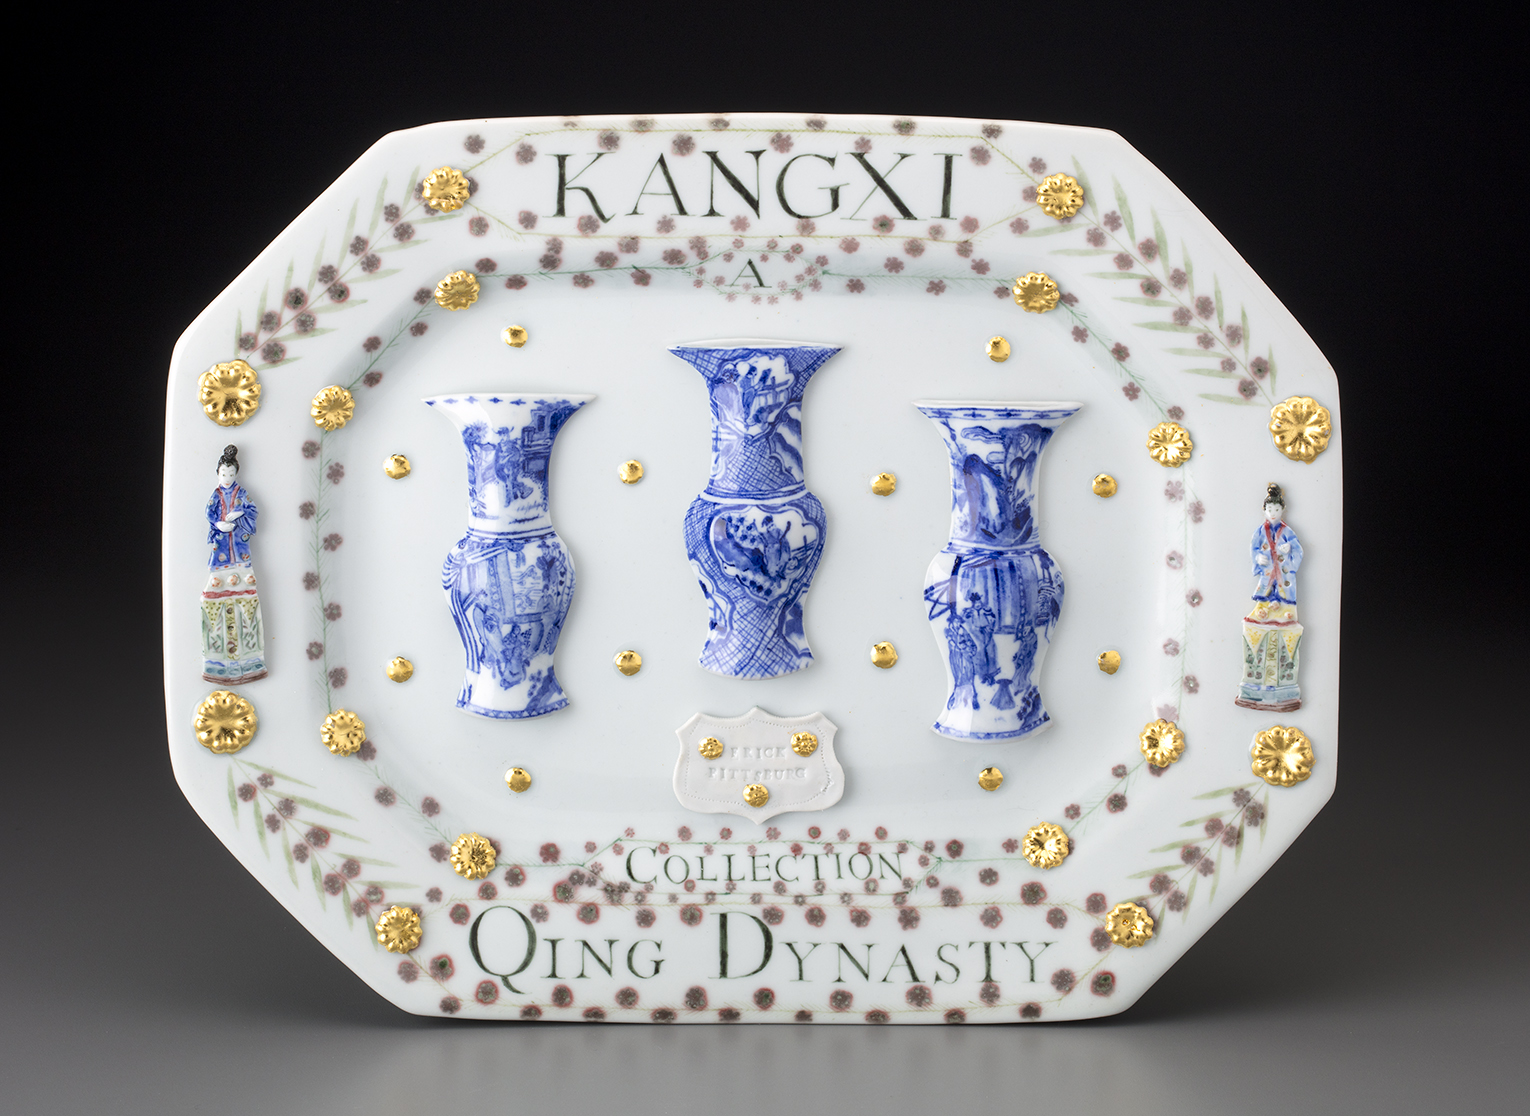 Mara Superior, "Kangxi Period, Qing Dynasty/A Collection", 2018.